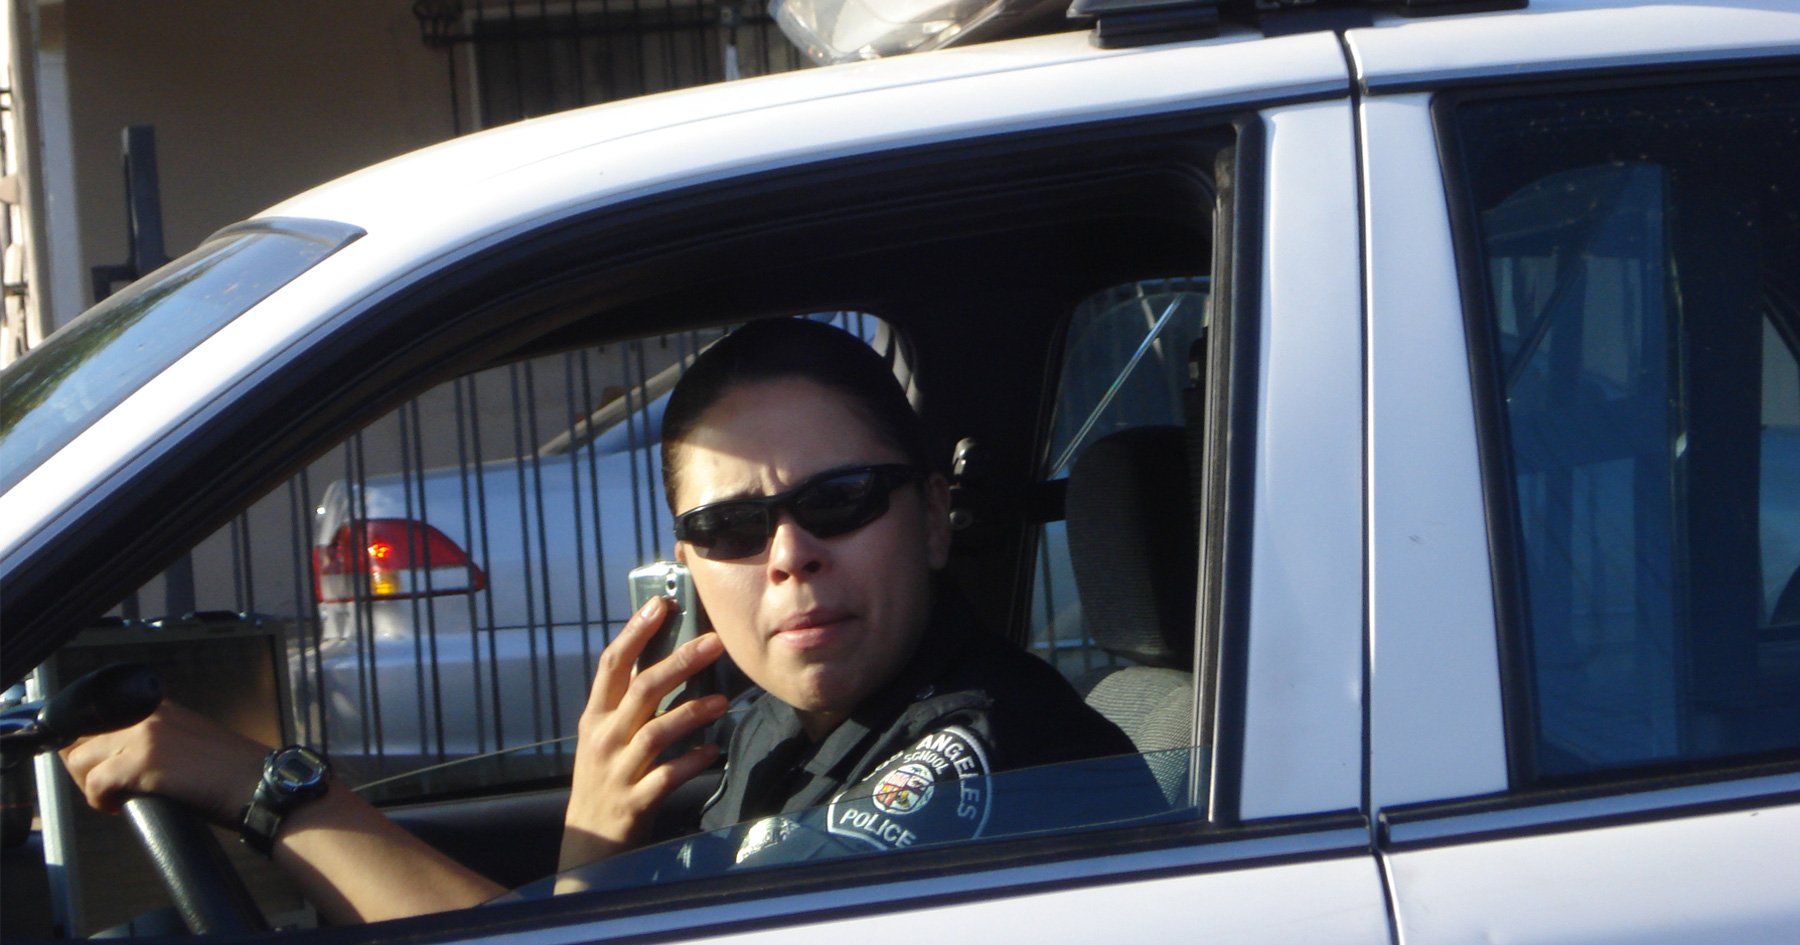 Should Police Track Cell Phones to Solve Petty Crimes?